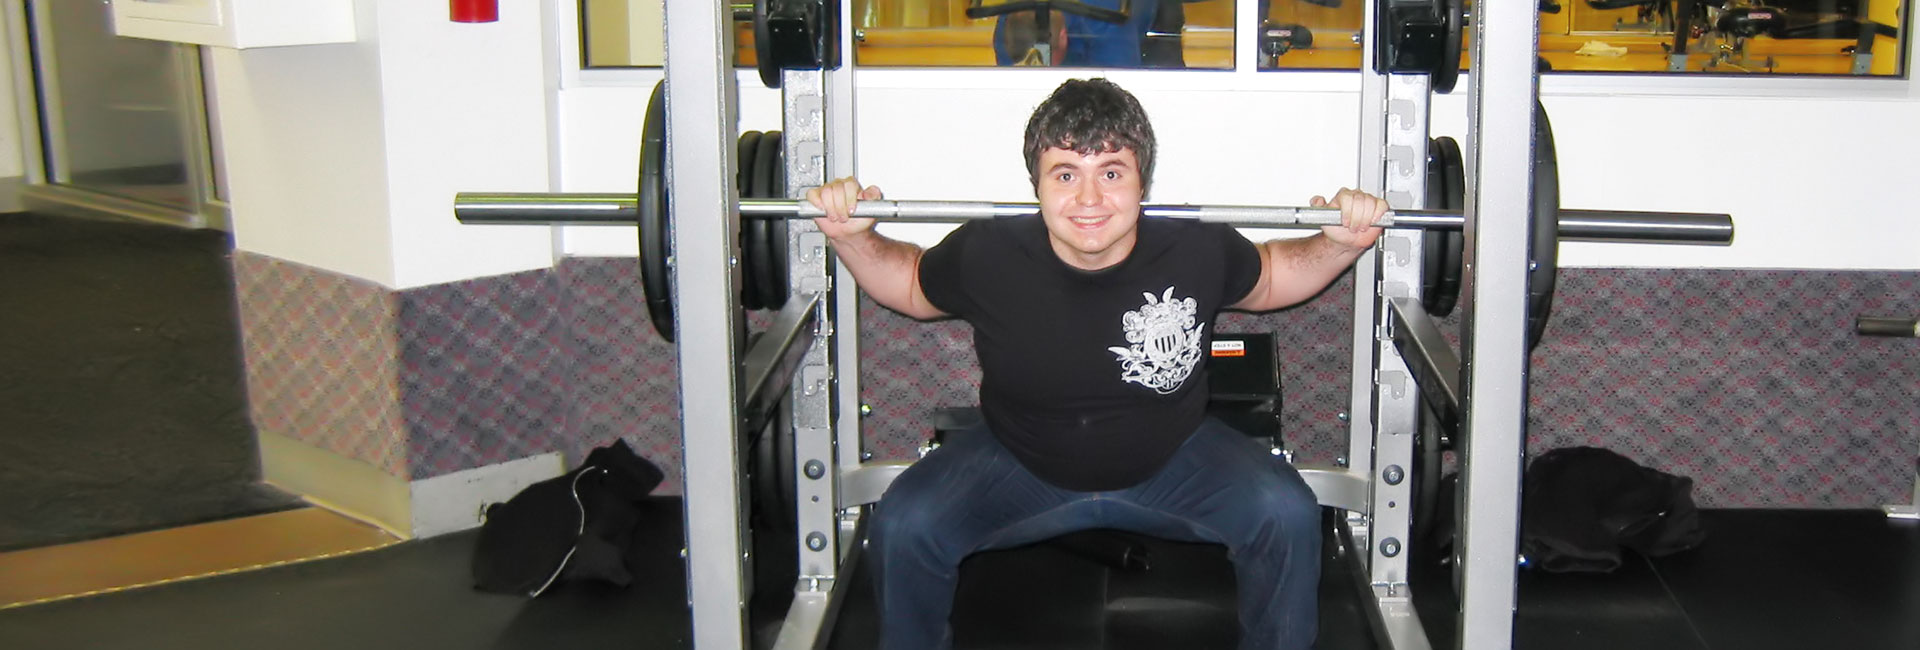 A young man lifting weights